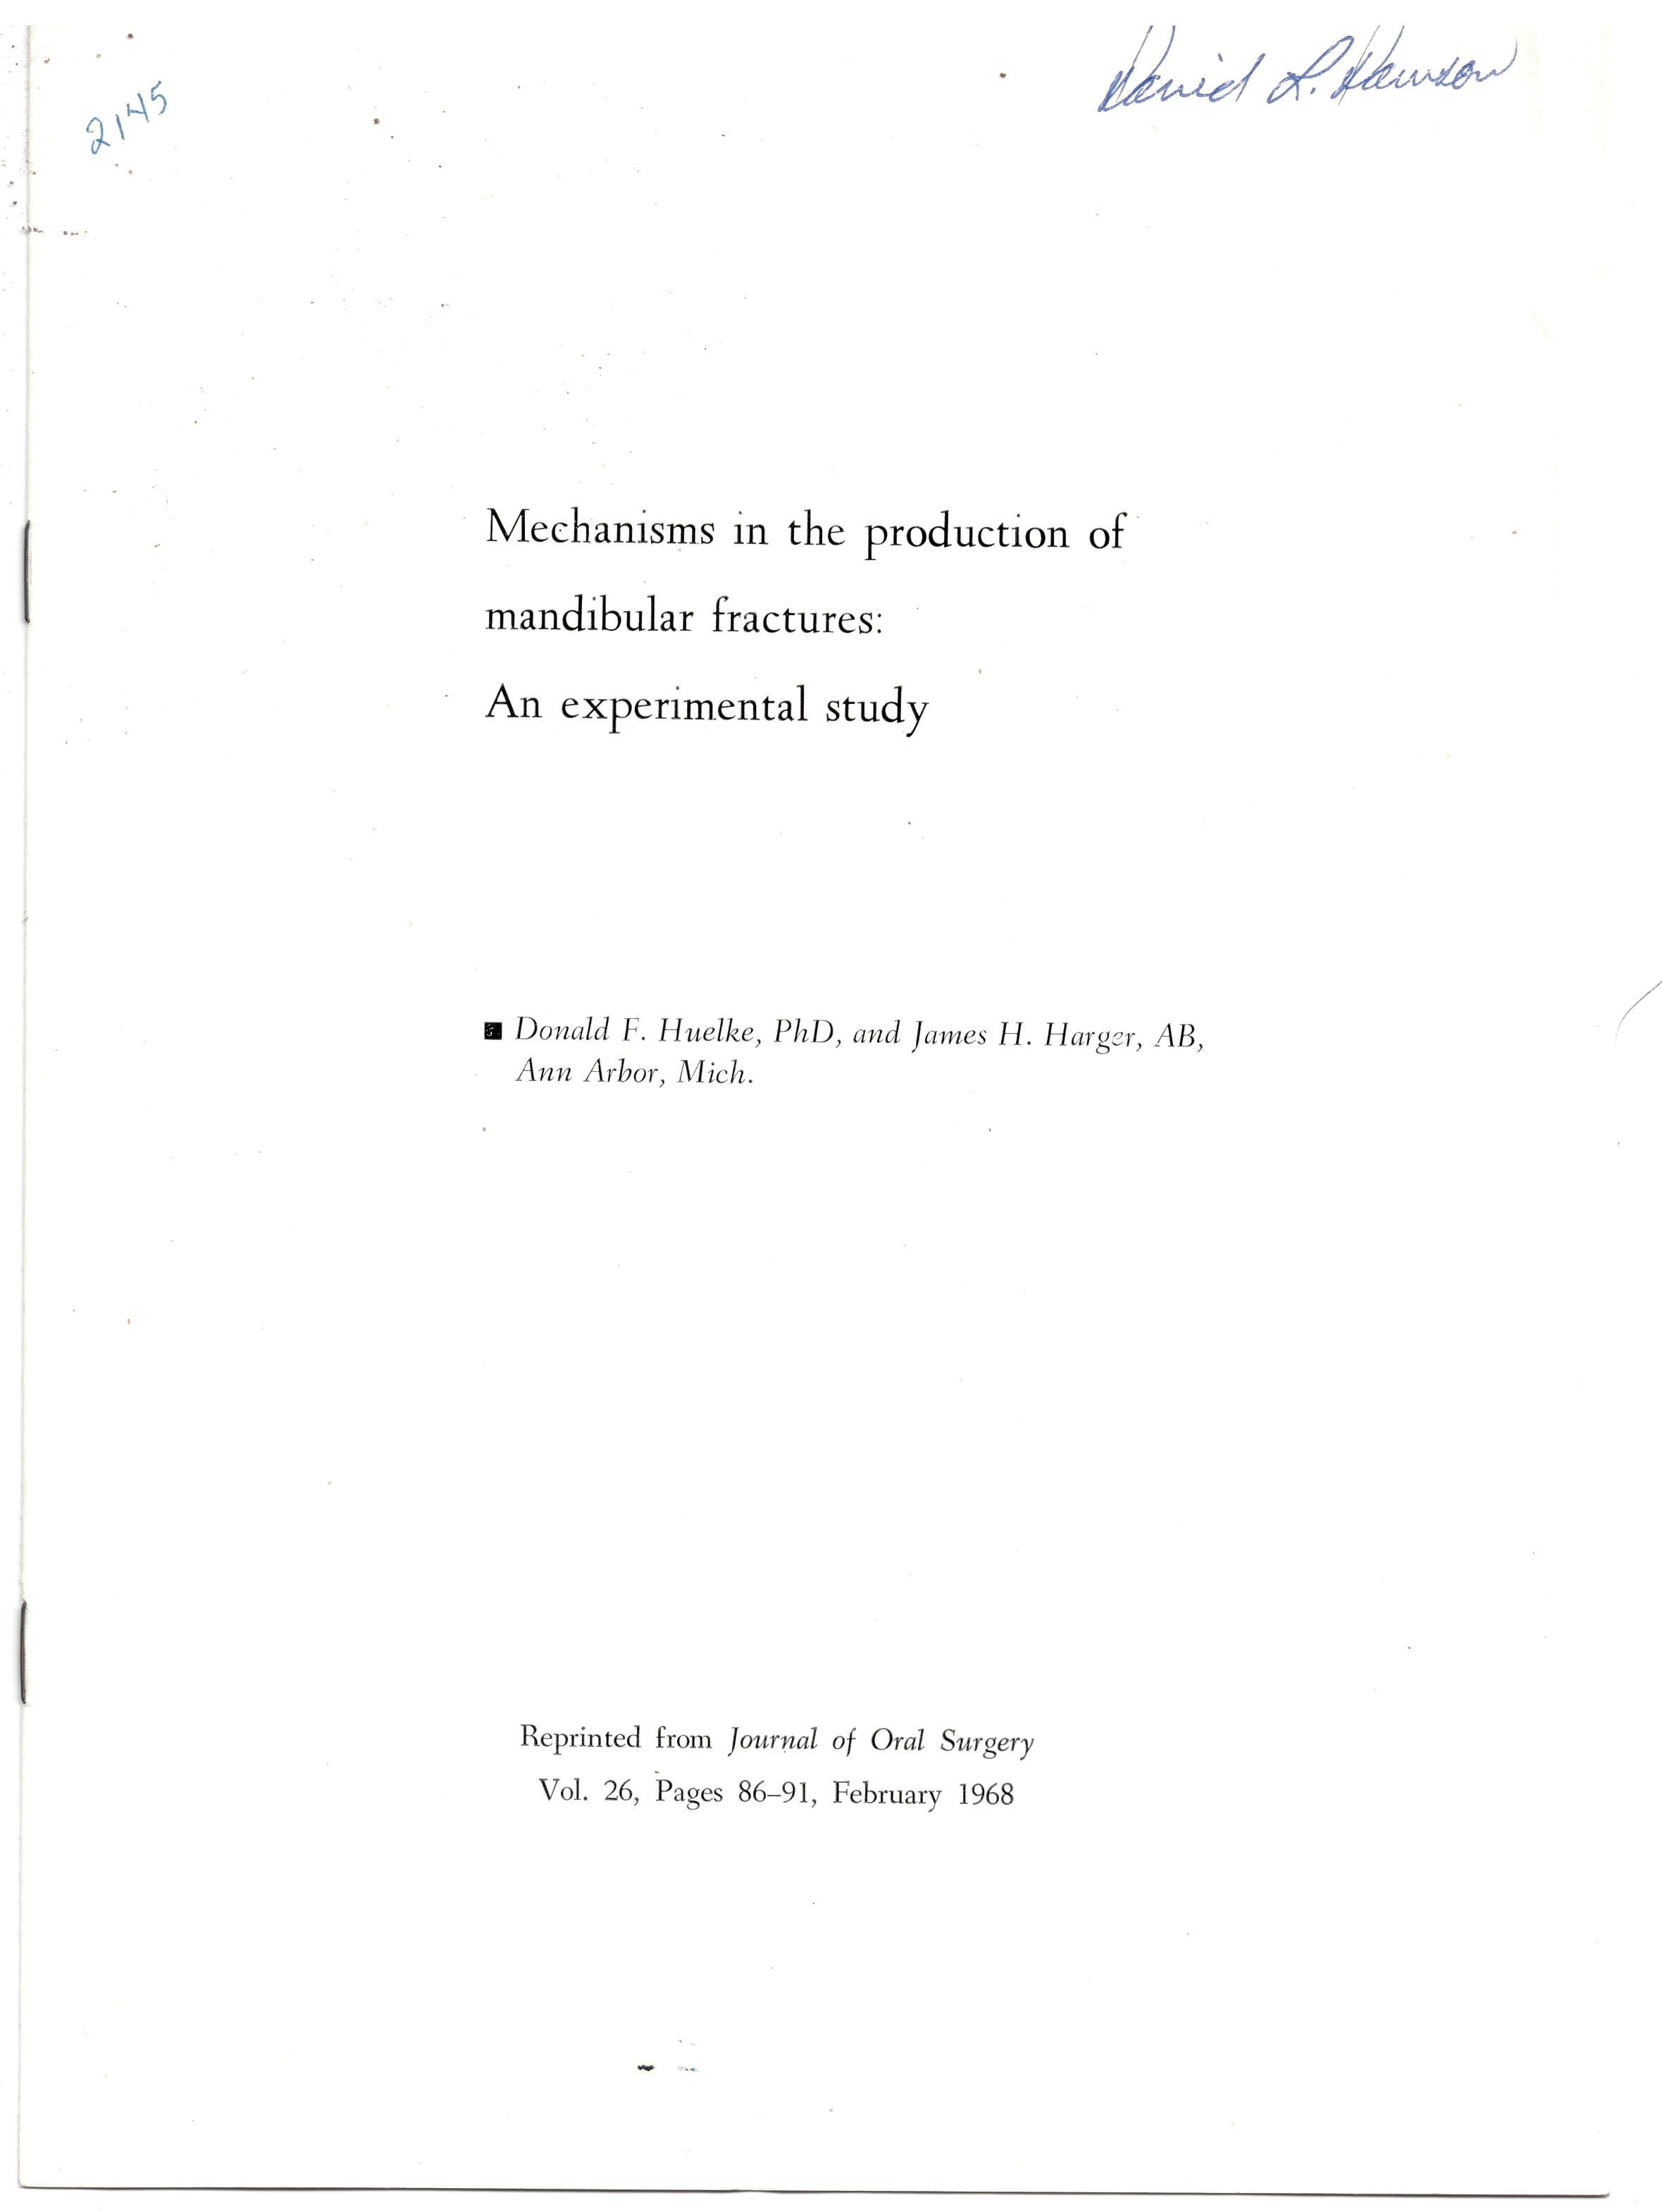 HUELKE, DONALD F. - Mechanisms in the Production of Mandibular Fractures: An Experimental Study. Reprinted from Journal of Oral Surgery Volume 26, February 1968